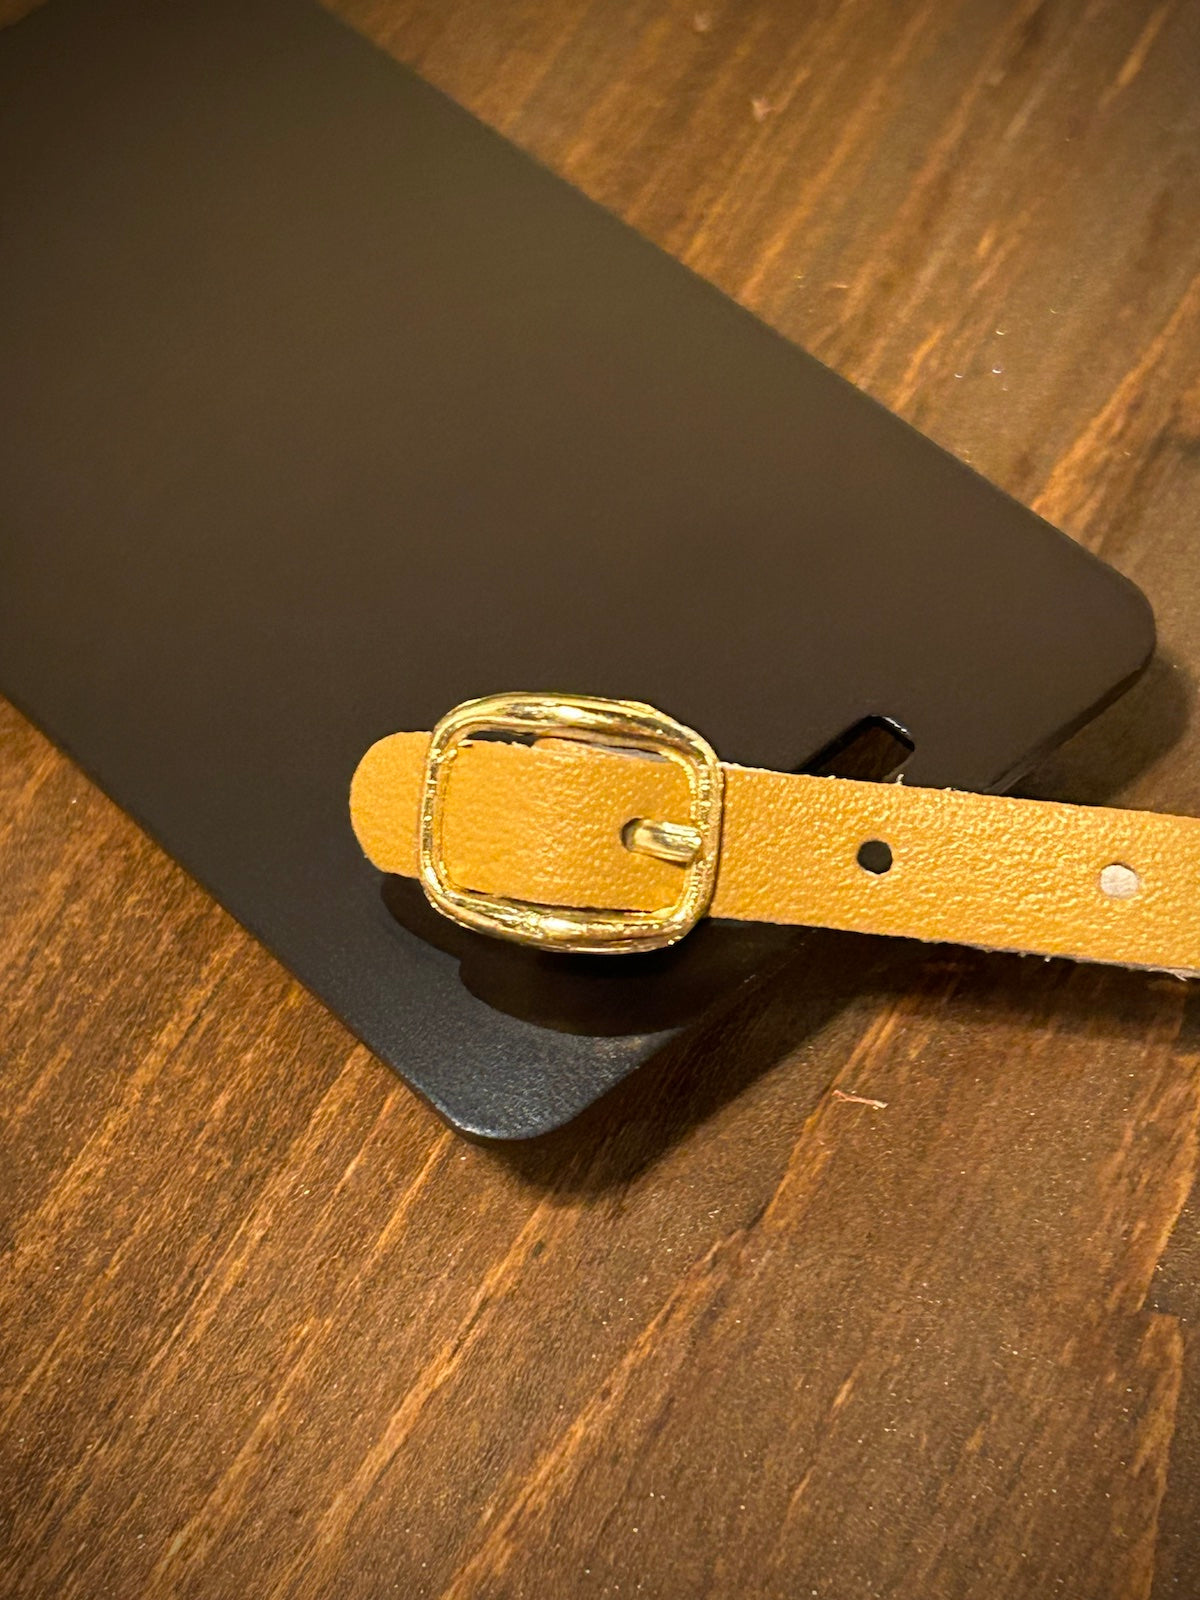 Black Anodized Aluminum Luggage Tag with Leather Strap